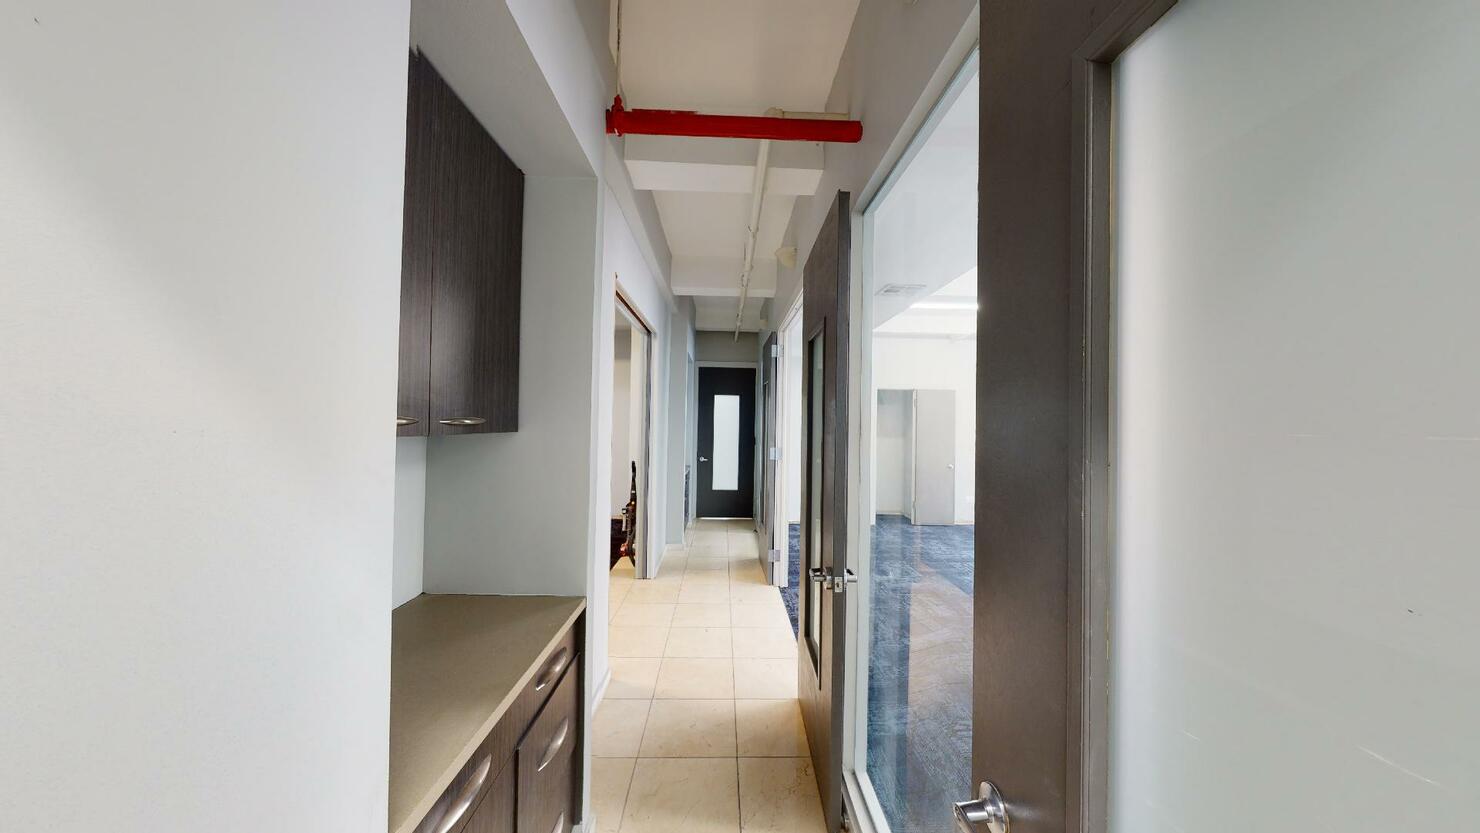 255 West 36th Street Office Space - Storage Space on the Corridor